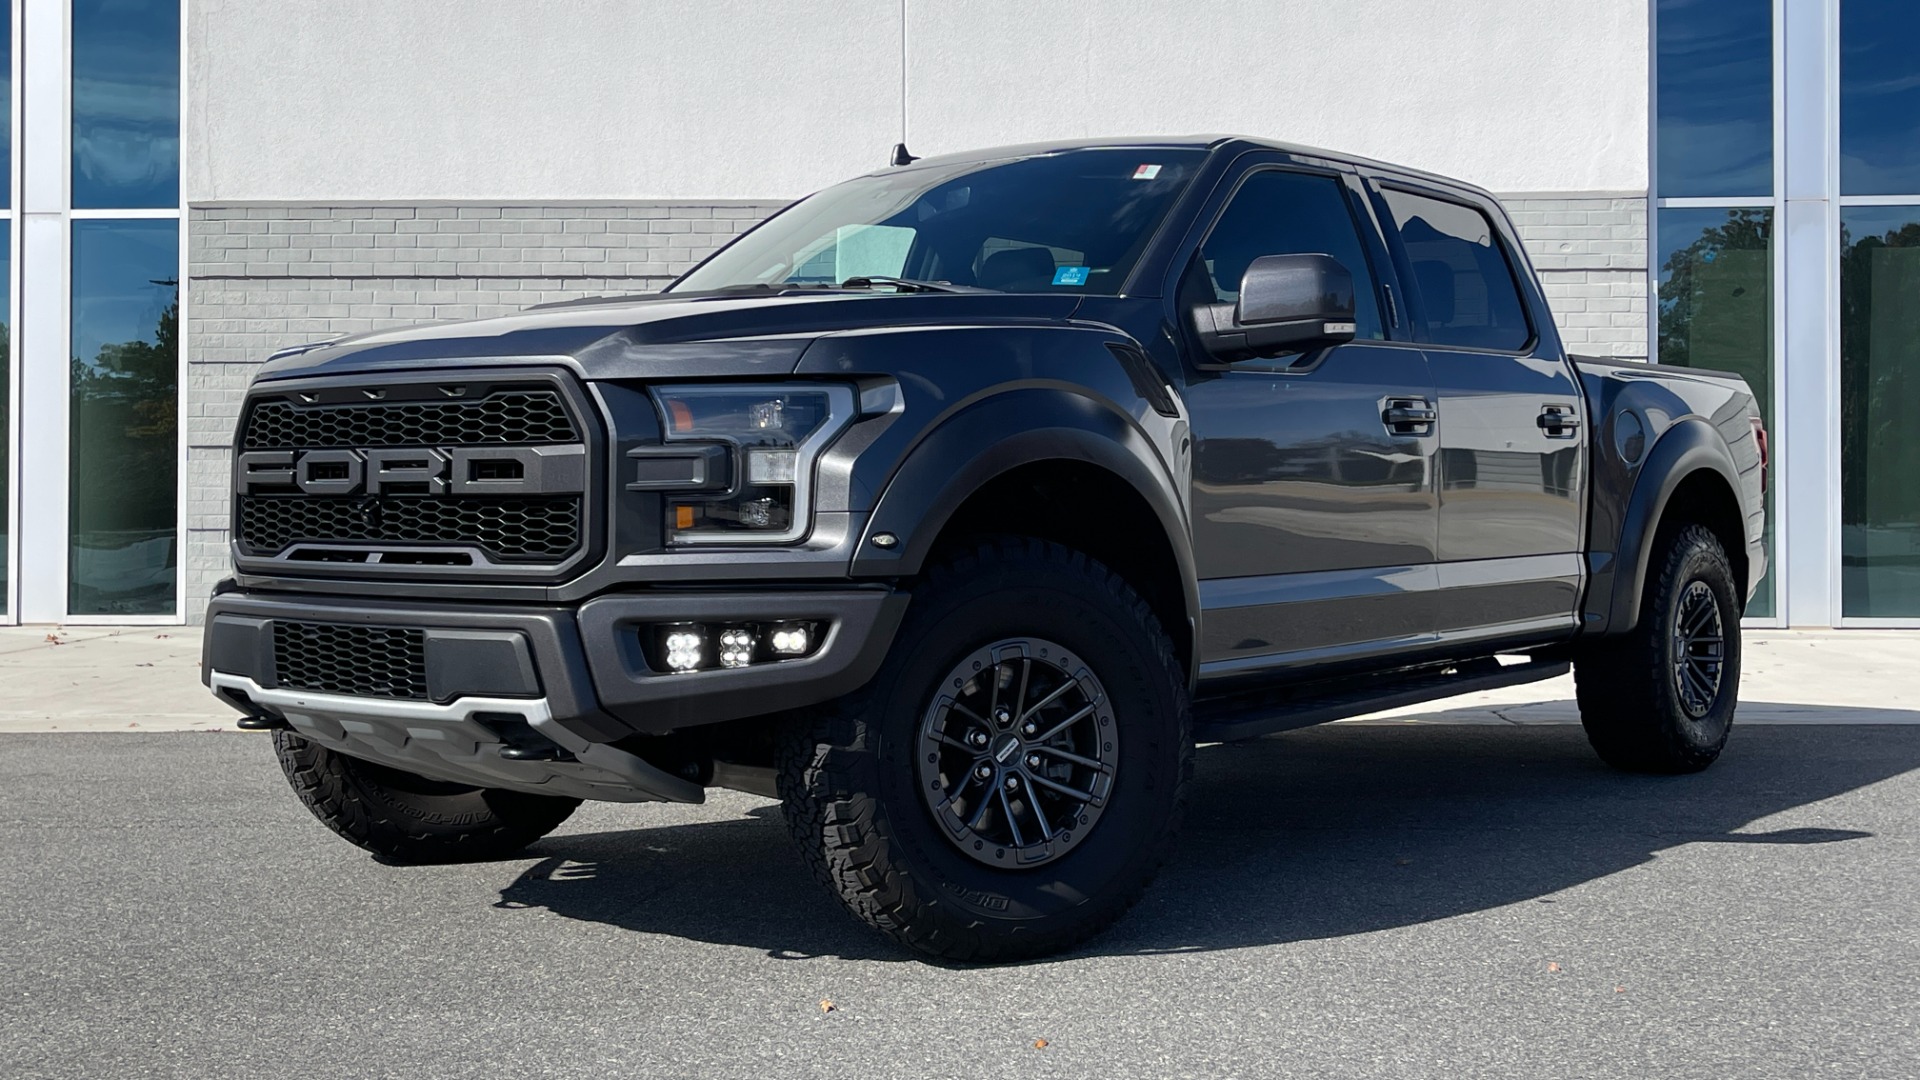 Used 2019 Ford F-150 RAPTOR / 802A PACKAGE / LIGHT PODS / CARBON FIBER / PANORAMIC ROOF for sale Sold at Formula Imports in Charlotte NC 28227 51